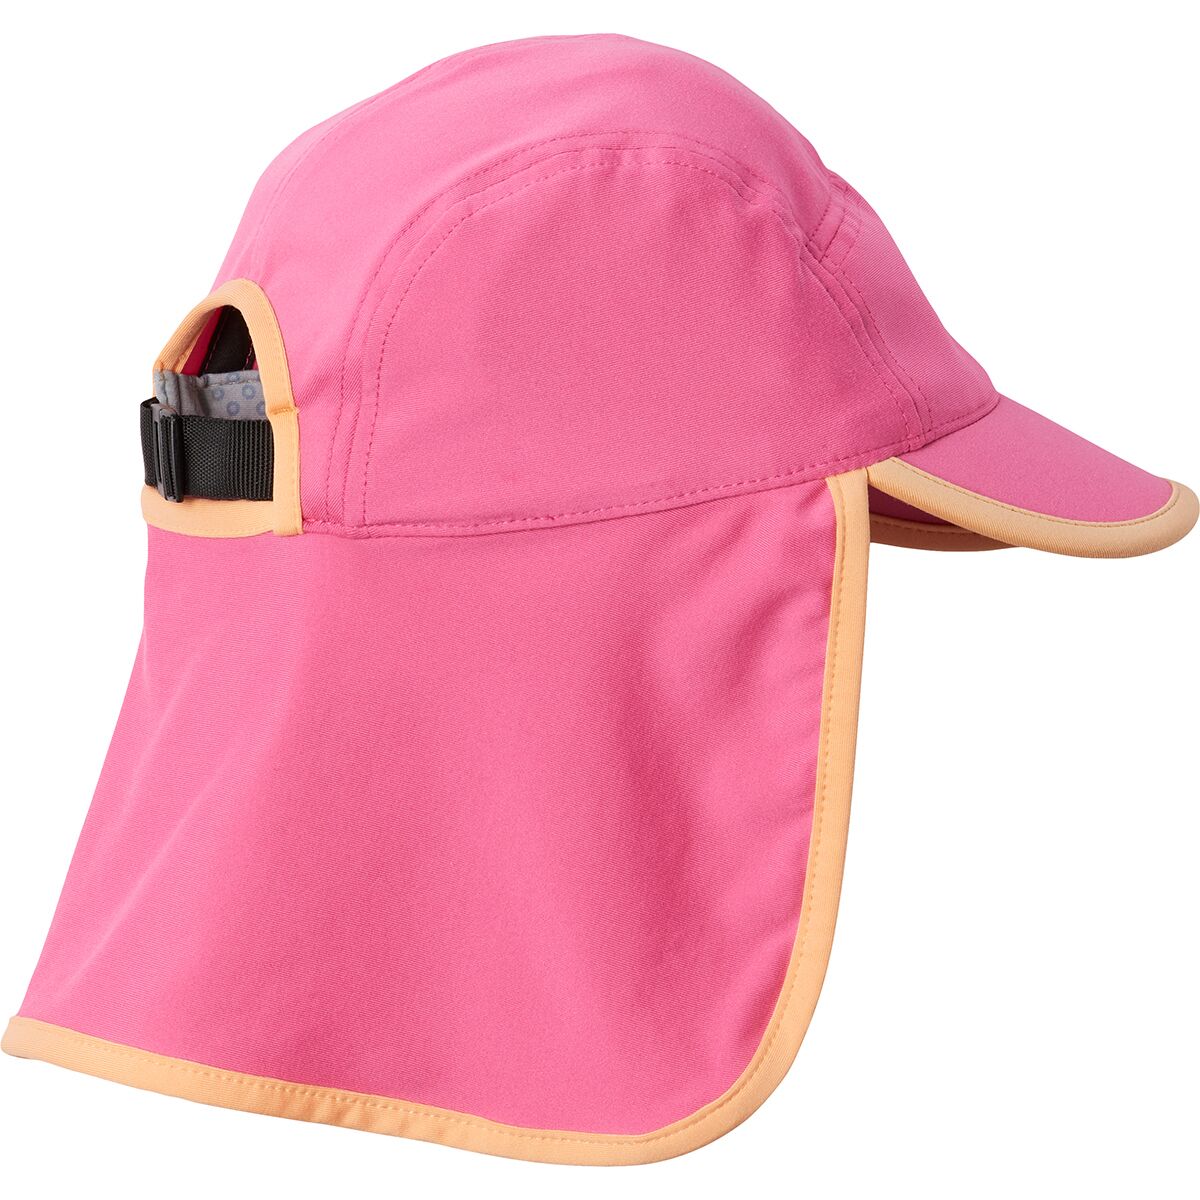 Columbia, Accessories, Columbia Youth Girls Catchalot Sun Hat Bright Pink